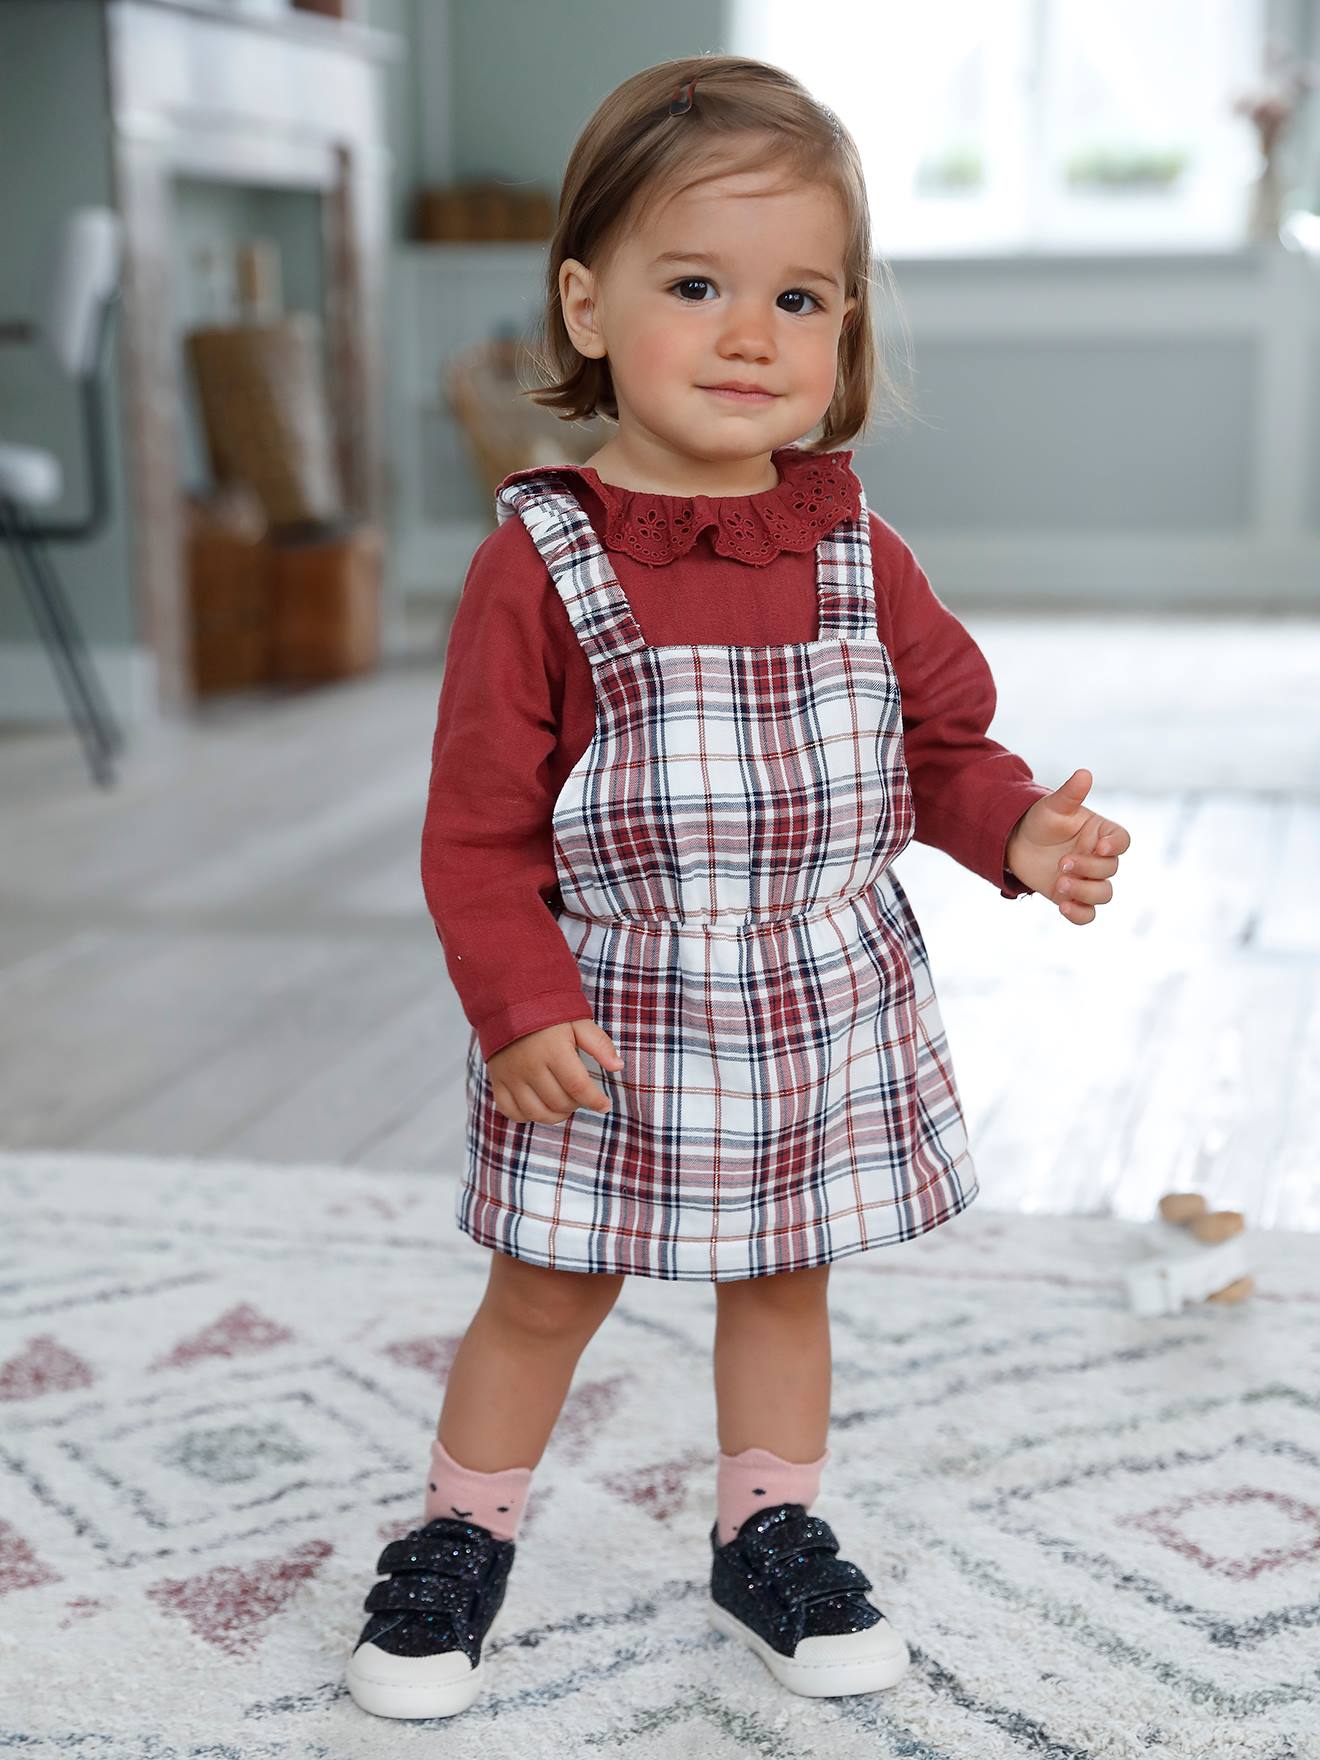 Dungaree Skirt For Baby Girl Deals  wwwescapeslacumbrees 1693533231